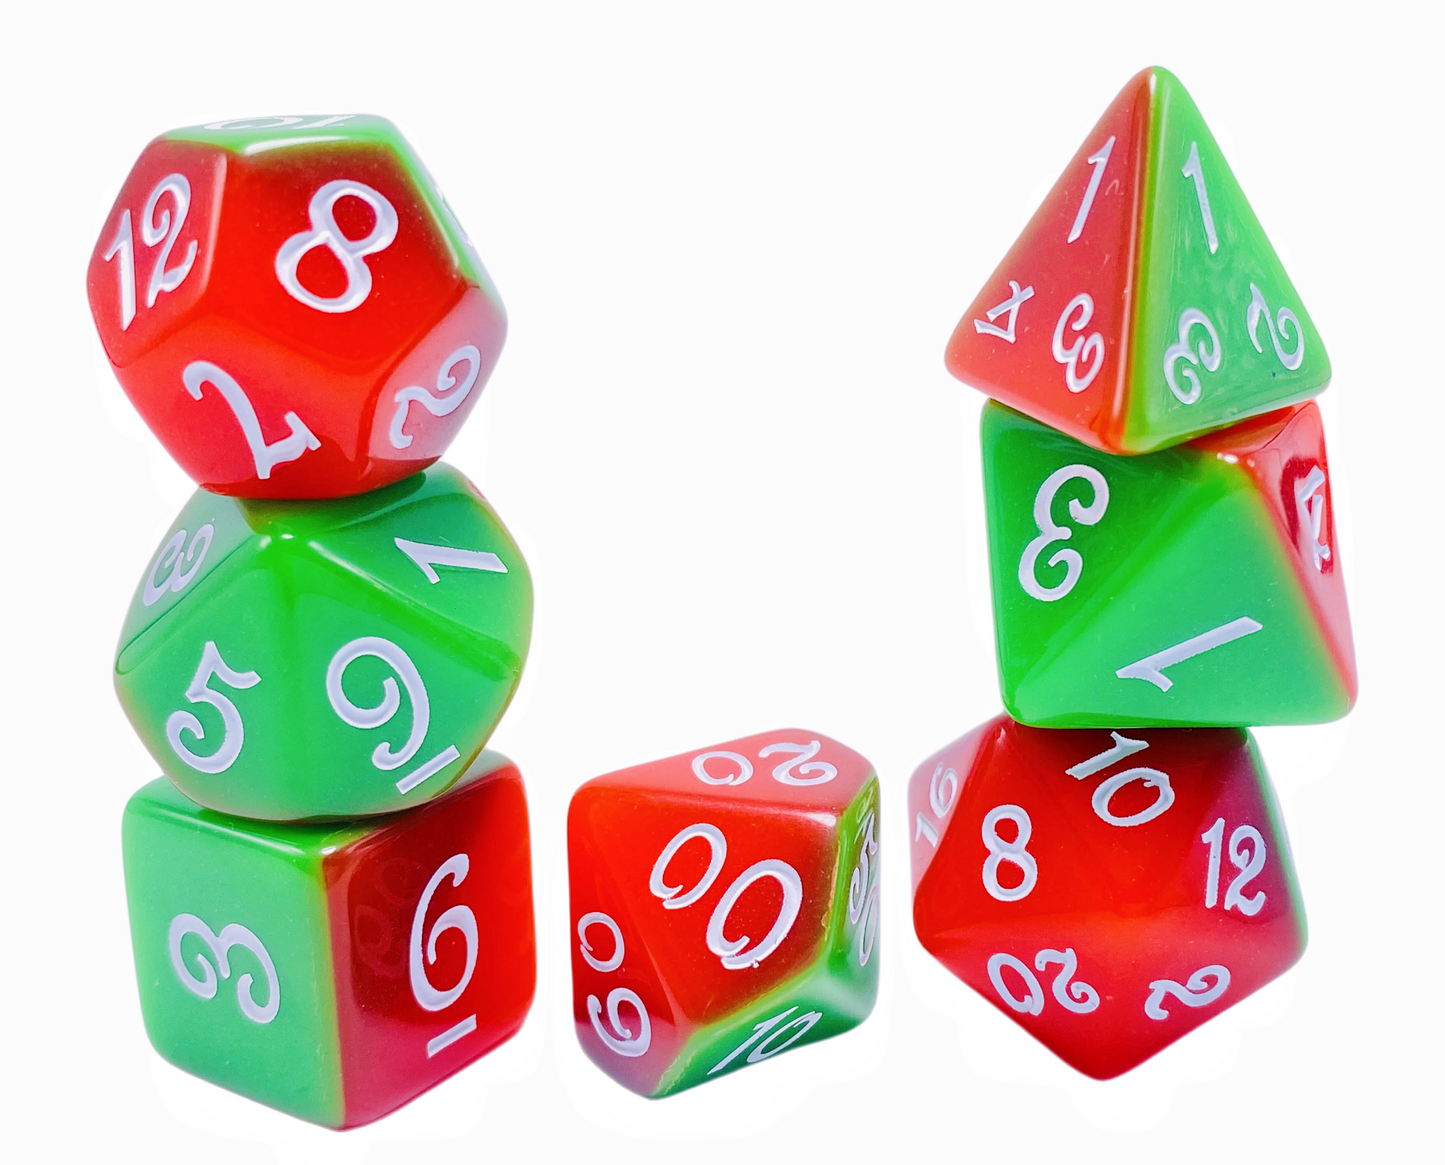 FREE Today: Watermelon DnD Dice Set